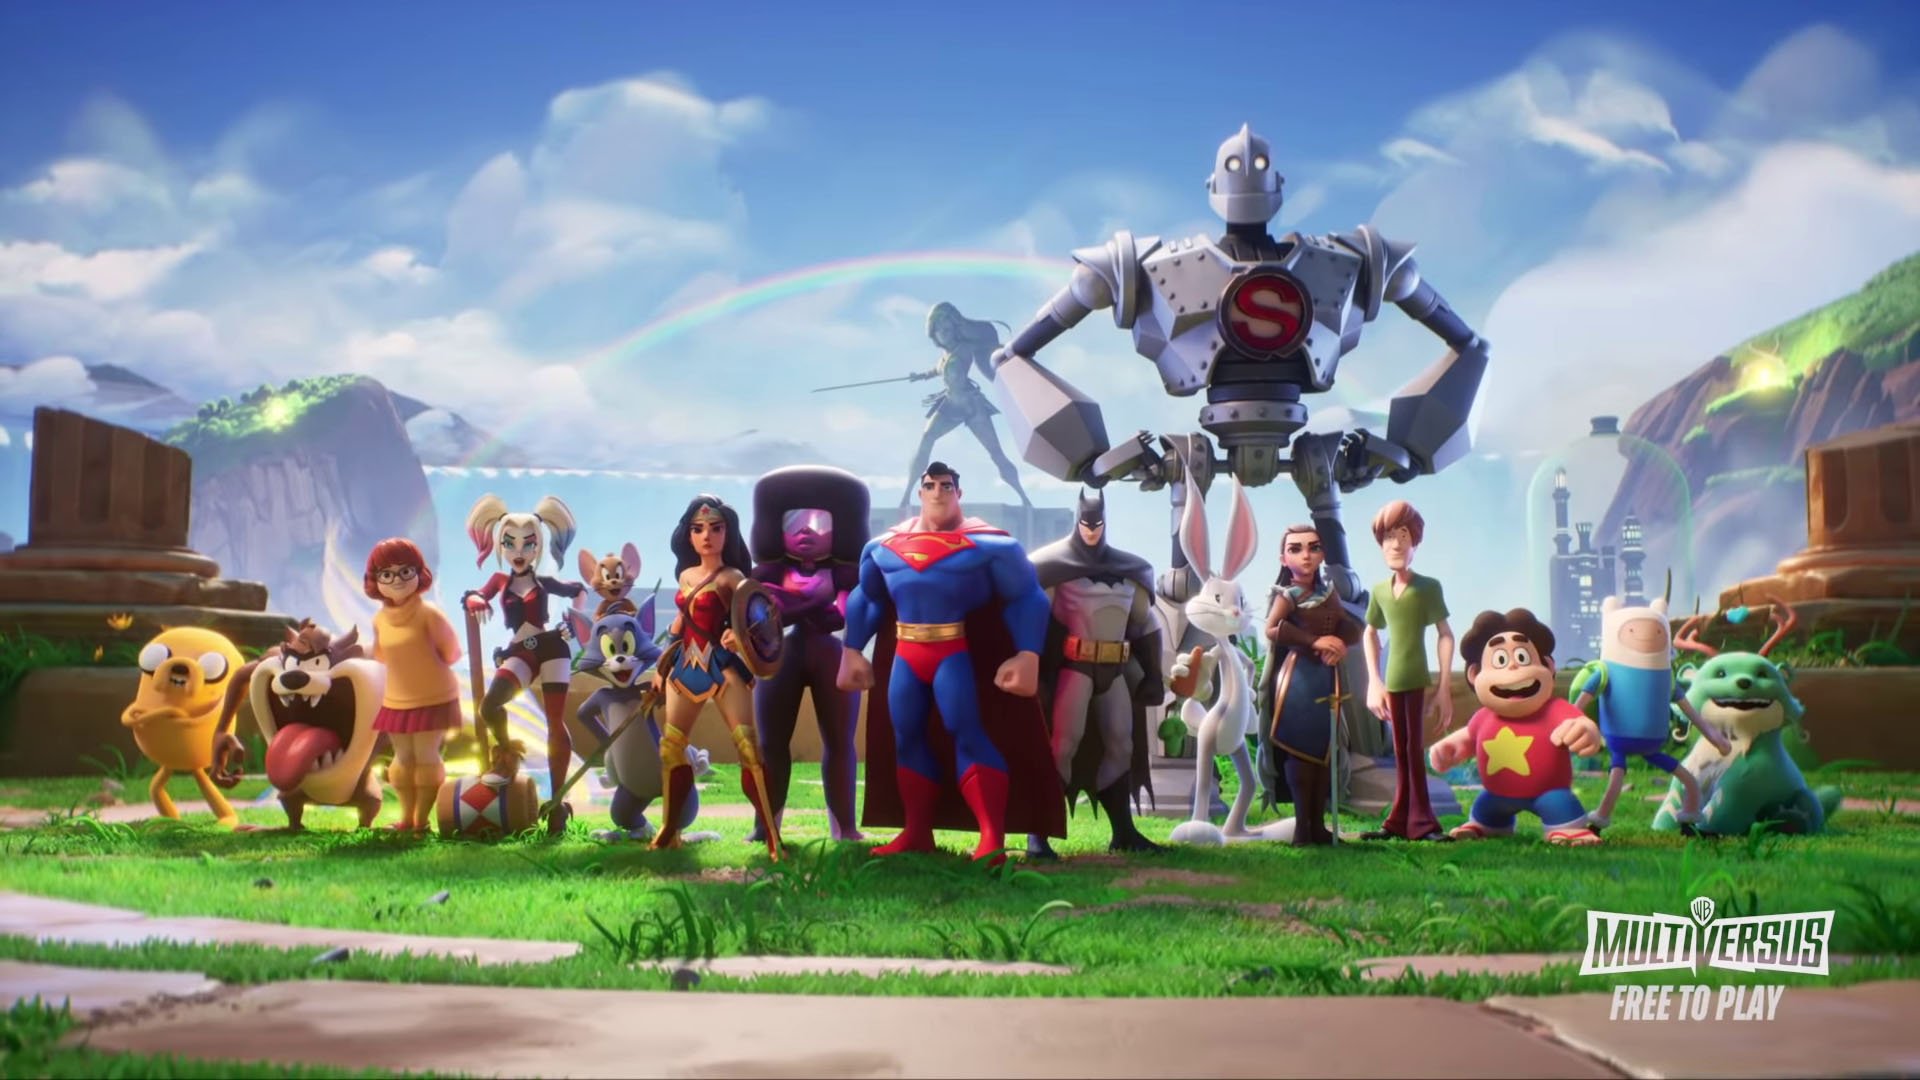 Warner Bros Games officially announces Multiversus, its free-to